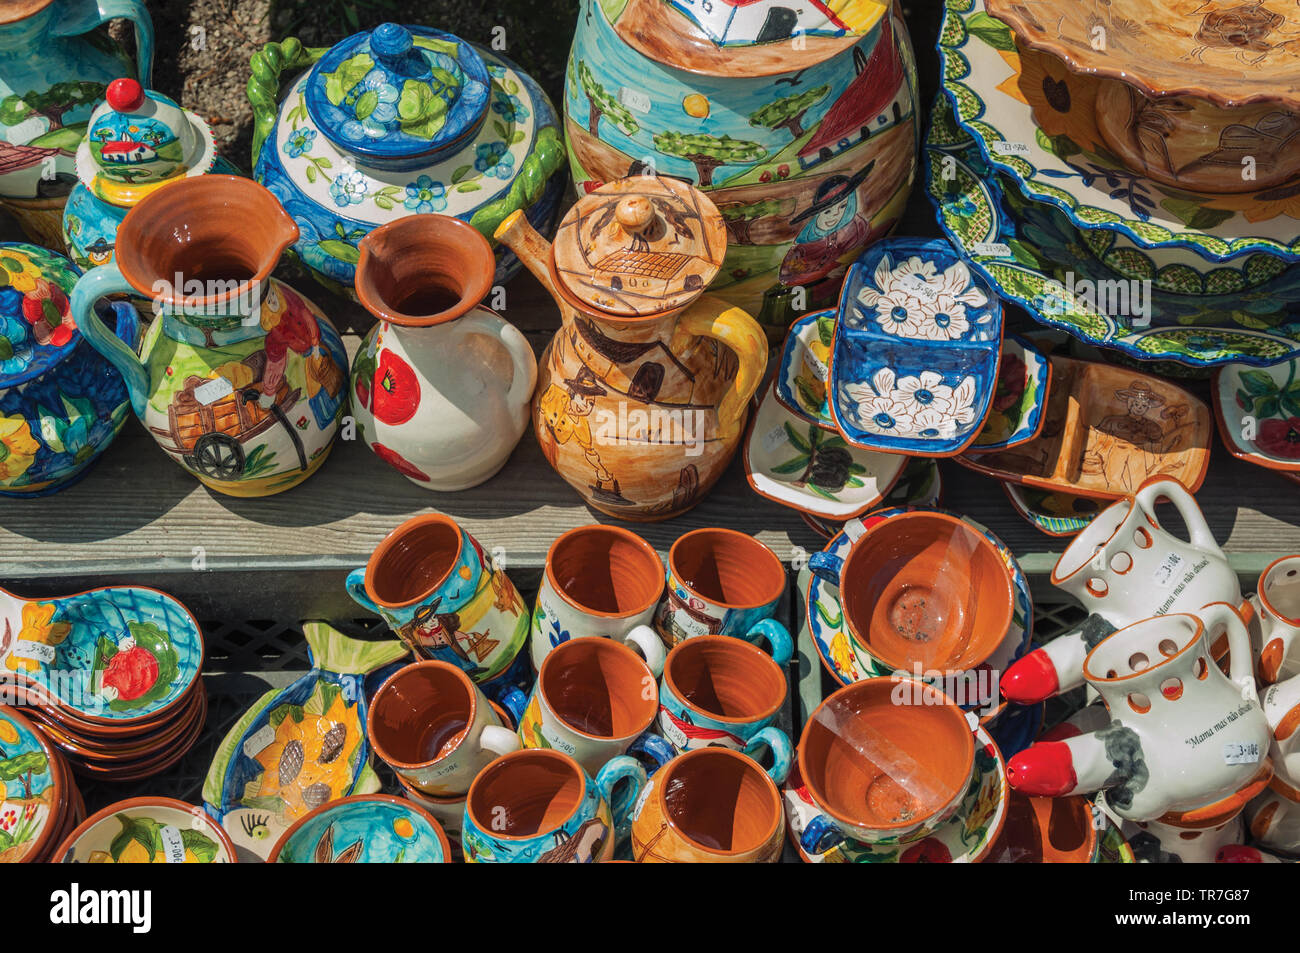 Colorful handmade porcelain pots and dishes, typical of the region ...